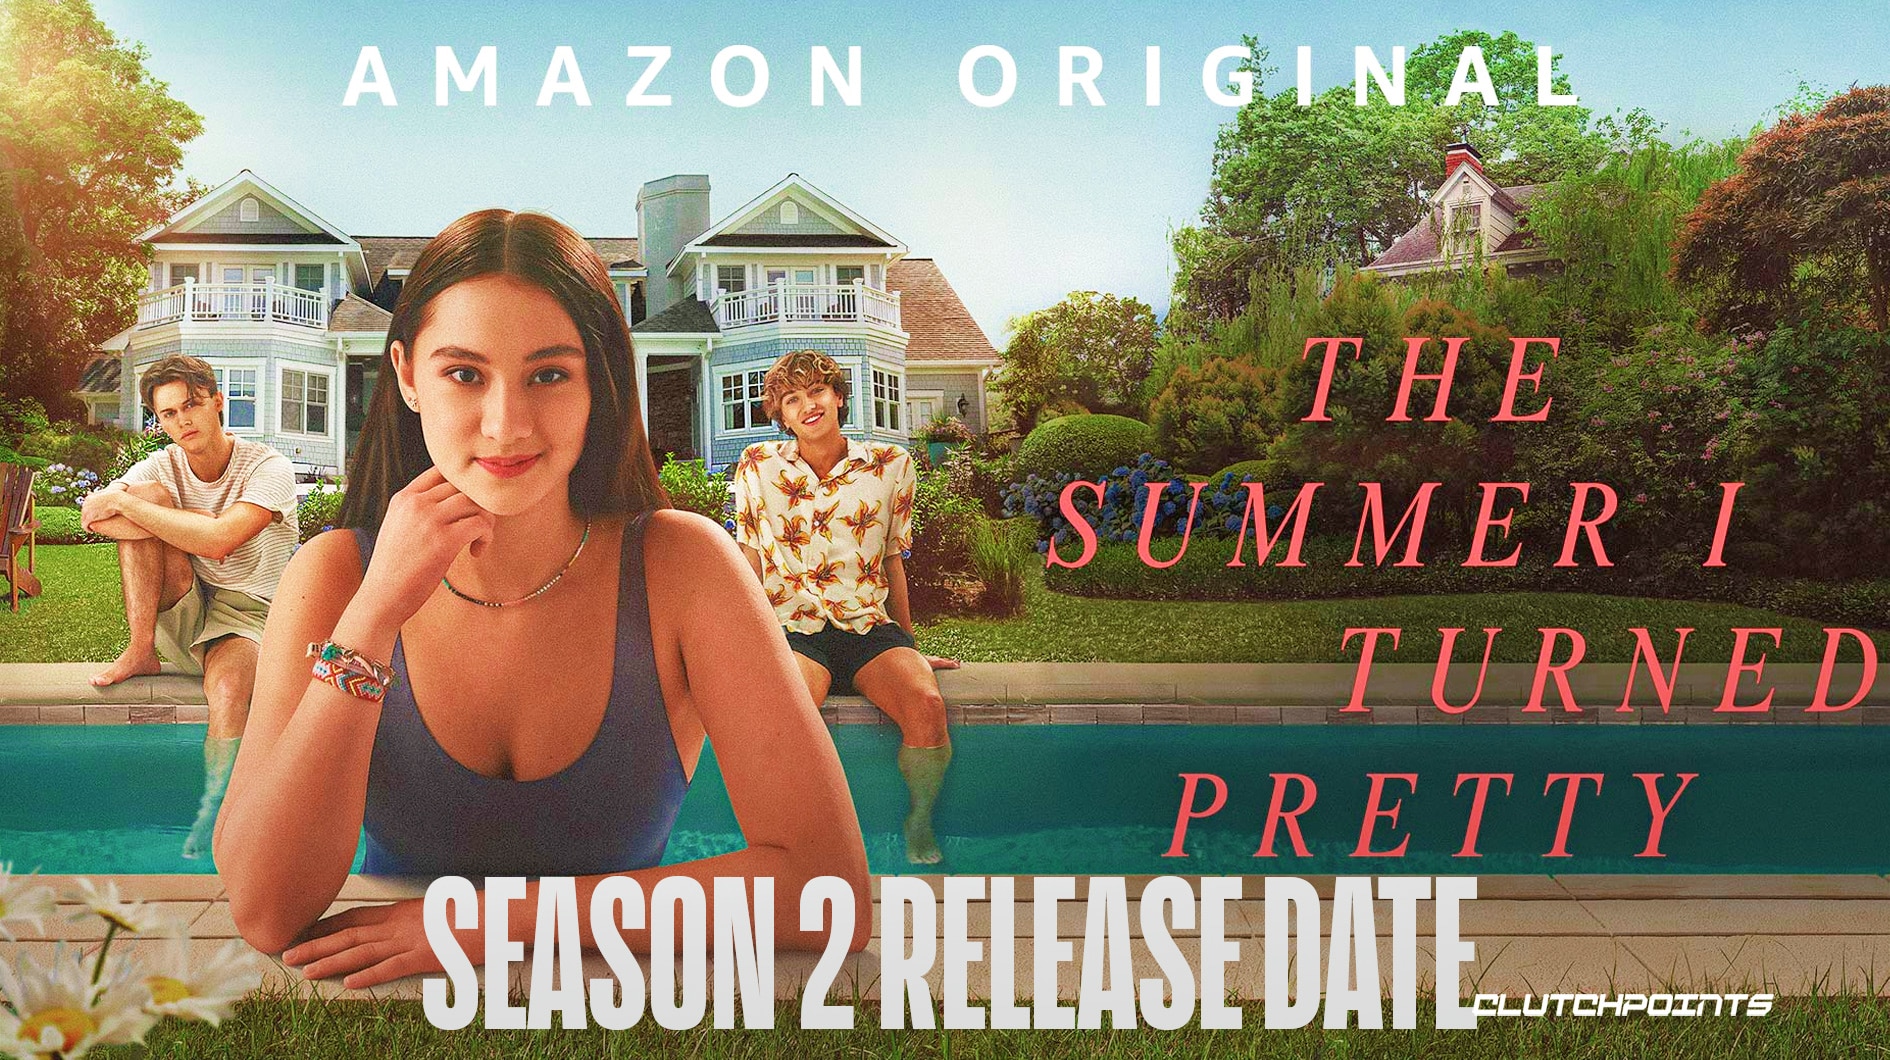 The Summer I Turned Pretty season 2 is officially here